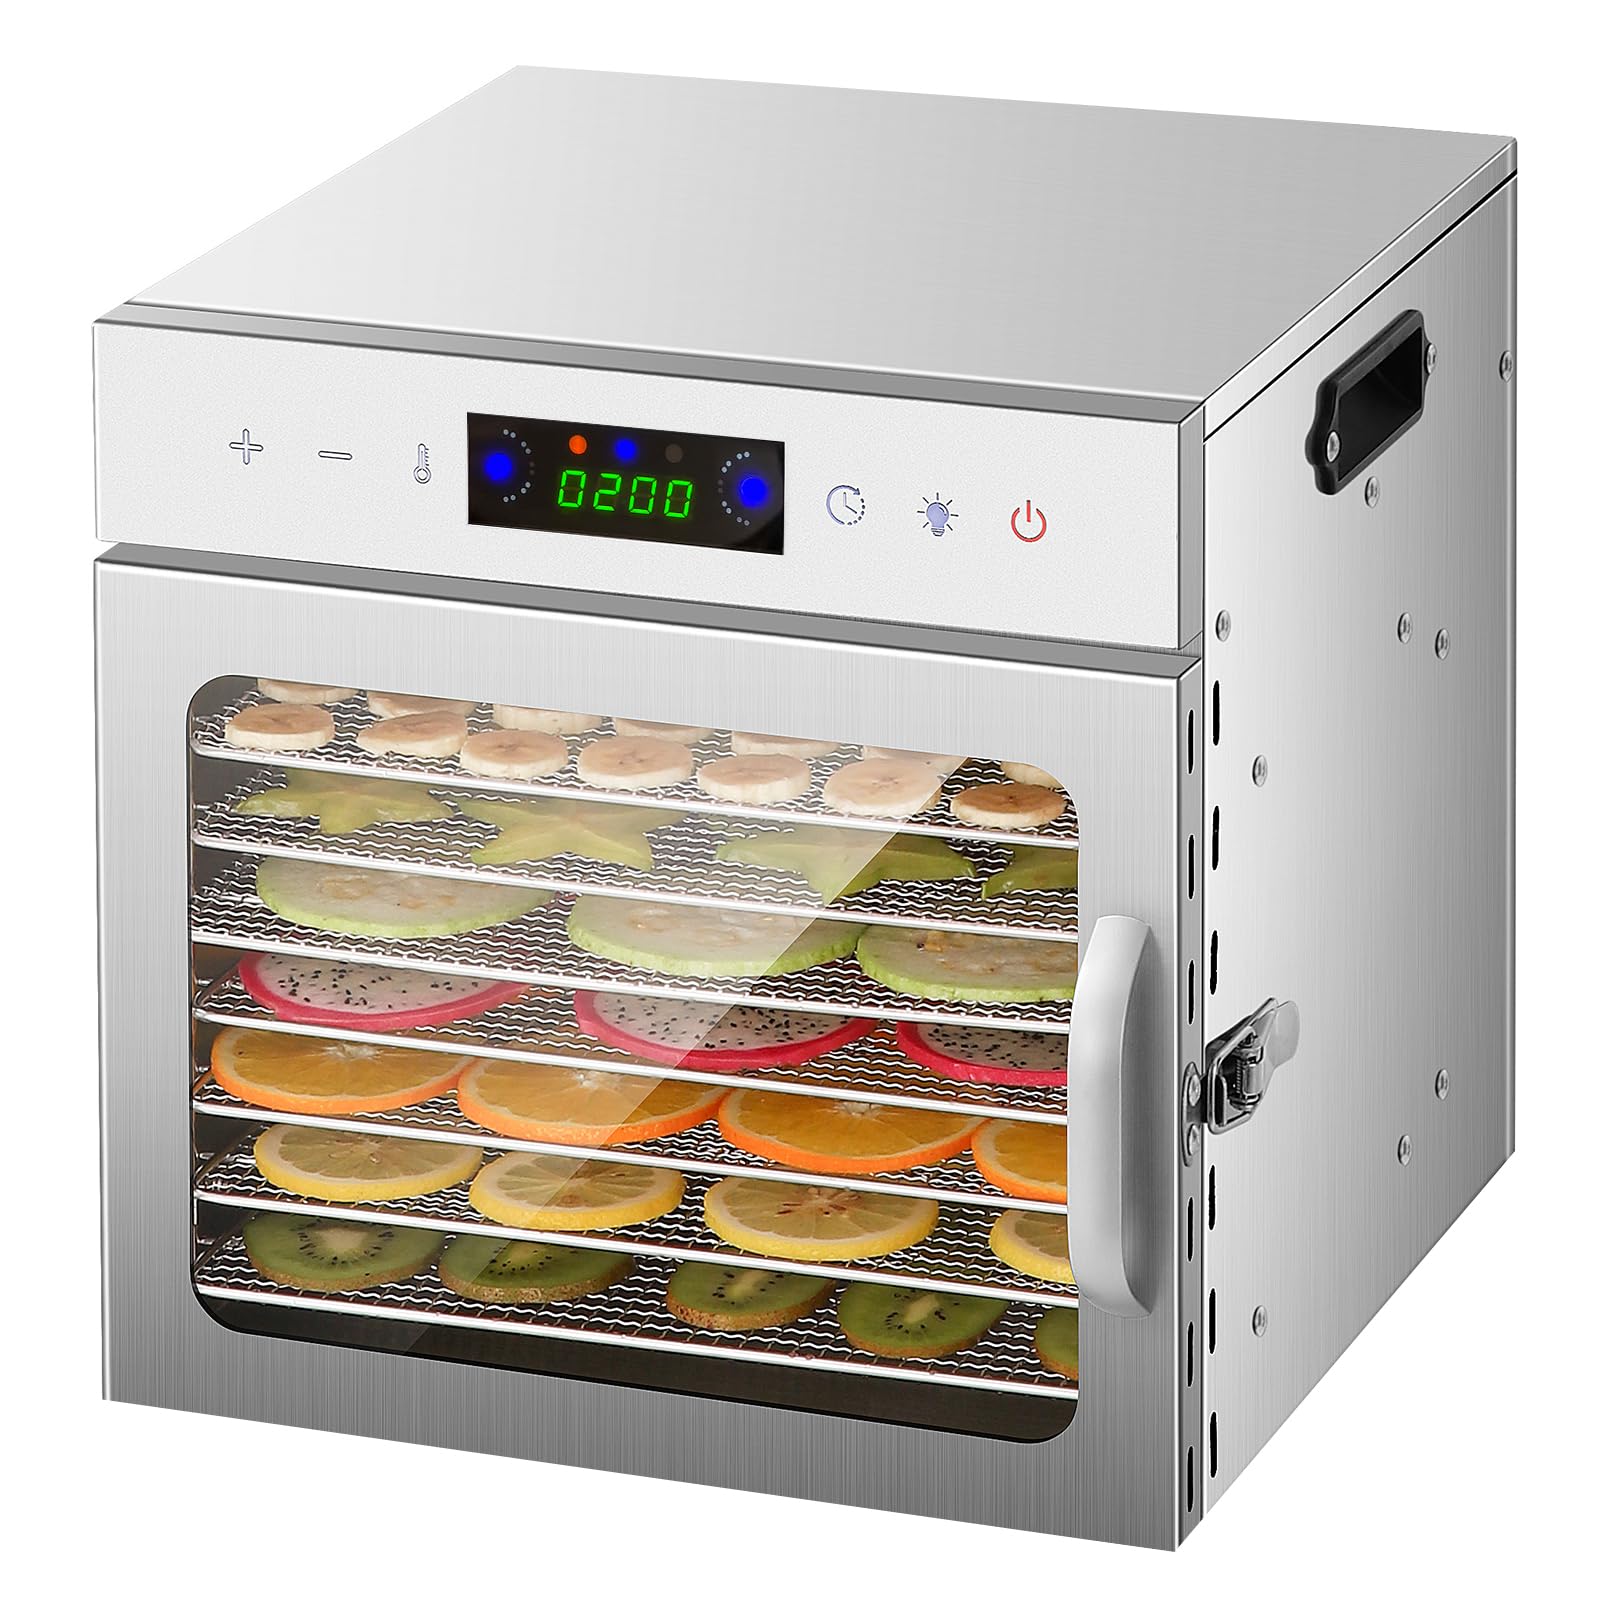 HOPERAN Food Dehydrator, 8 Stainless Steel Trays Dehydrators for Food and Jerky, Herbs, Fruit, Dehydrator Machine with Digital Timer and Temperature Control, Overheat Protection, Recipe Book Included